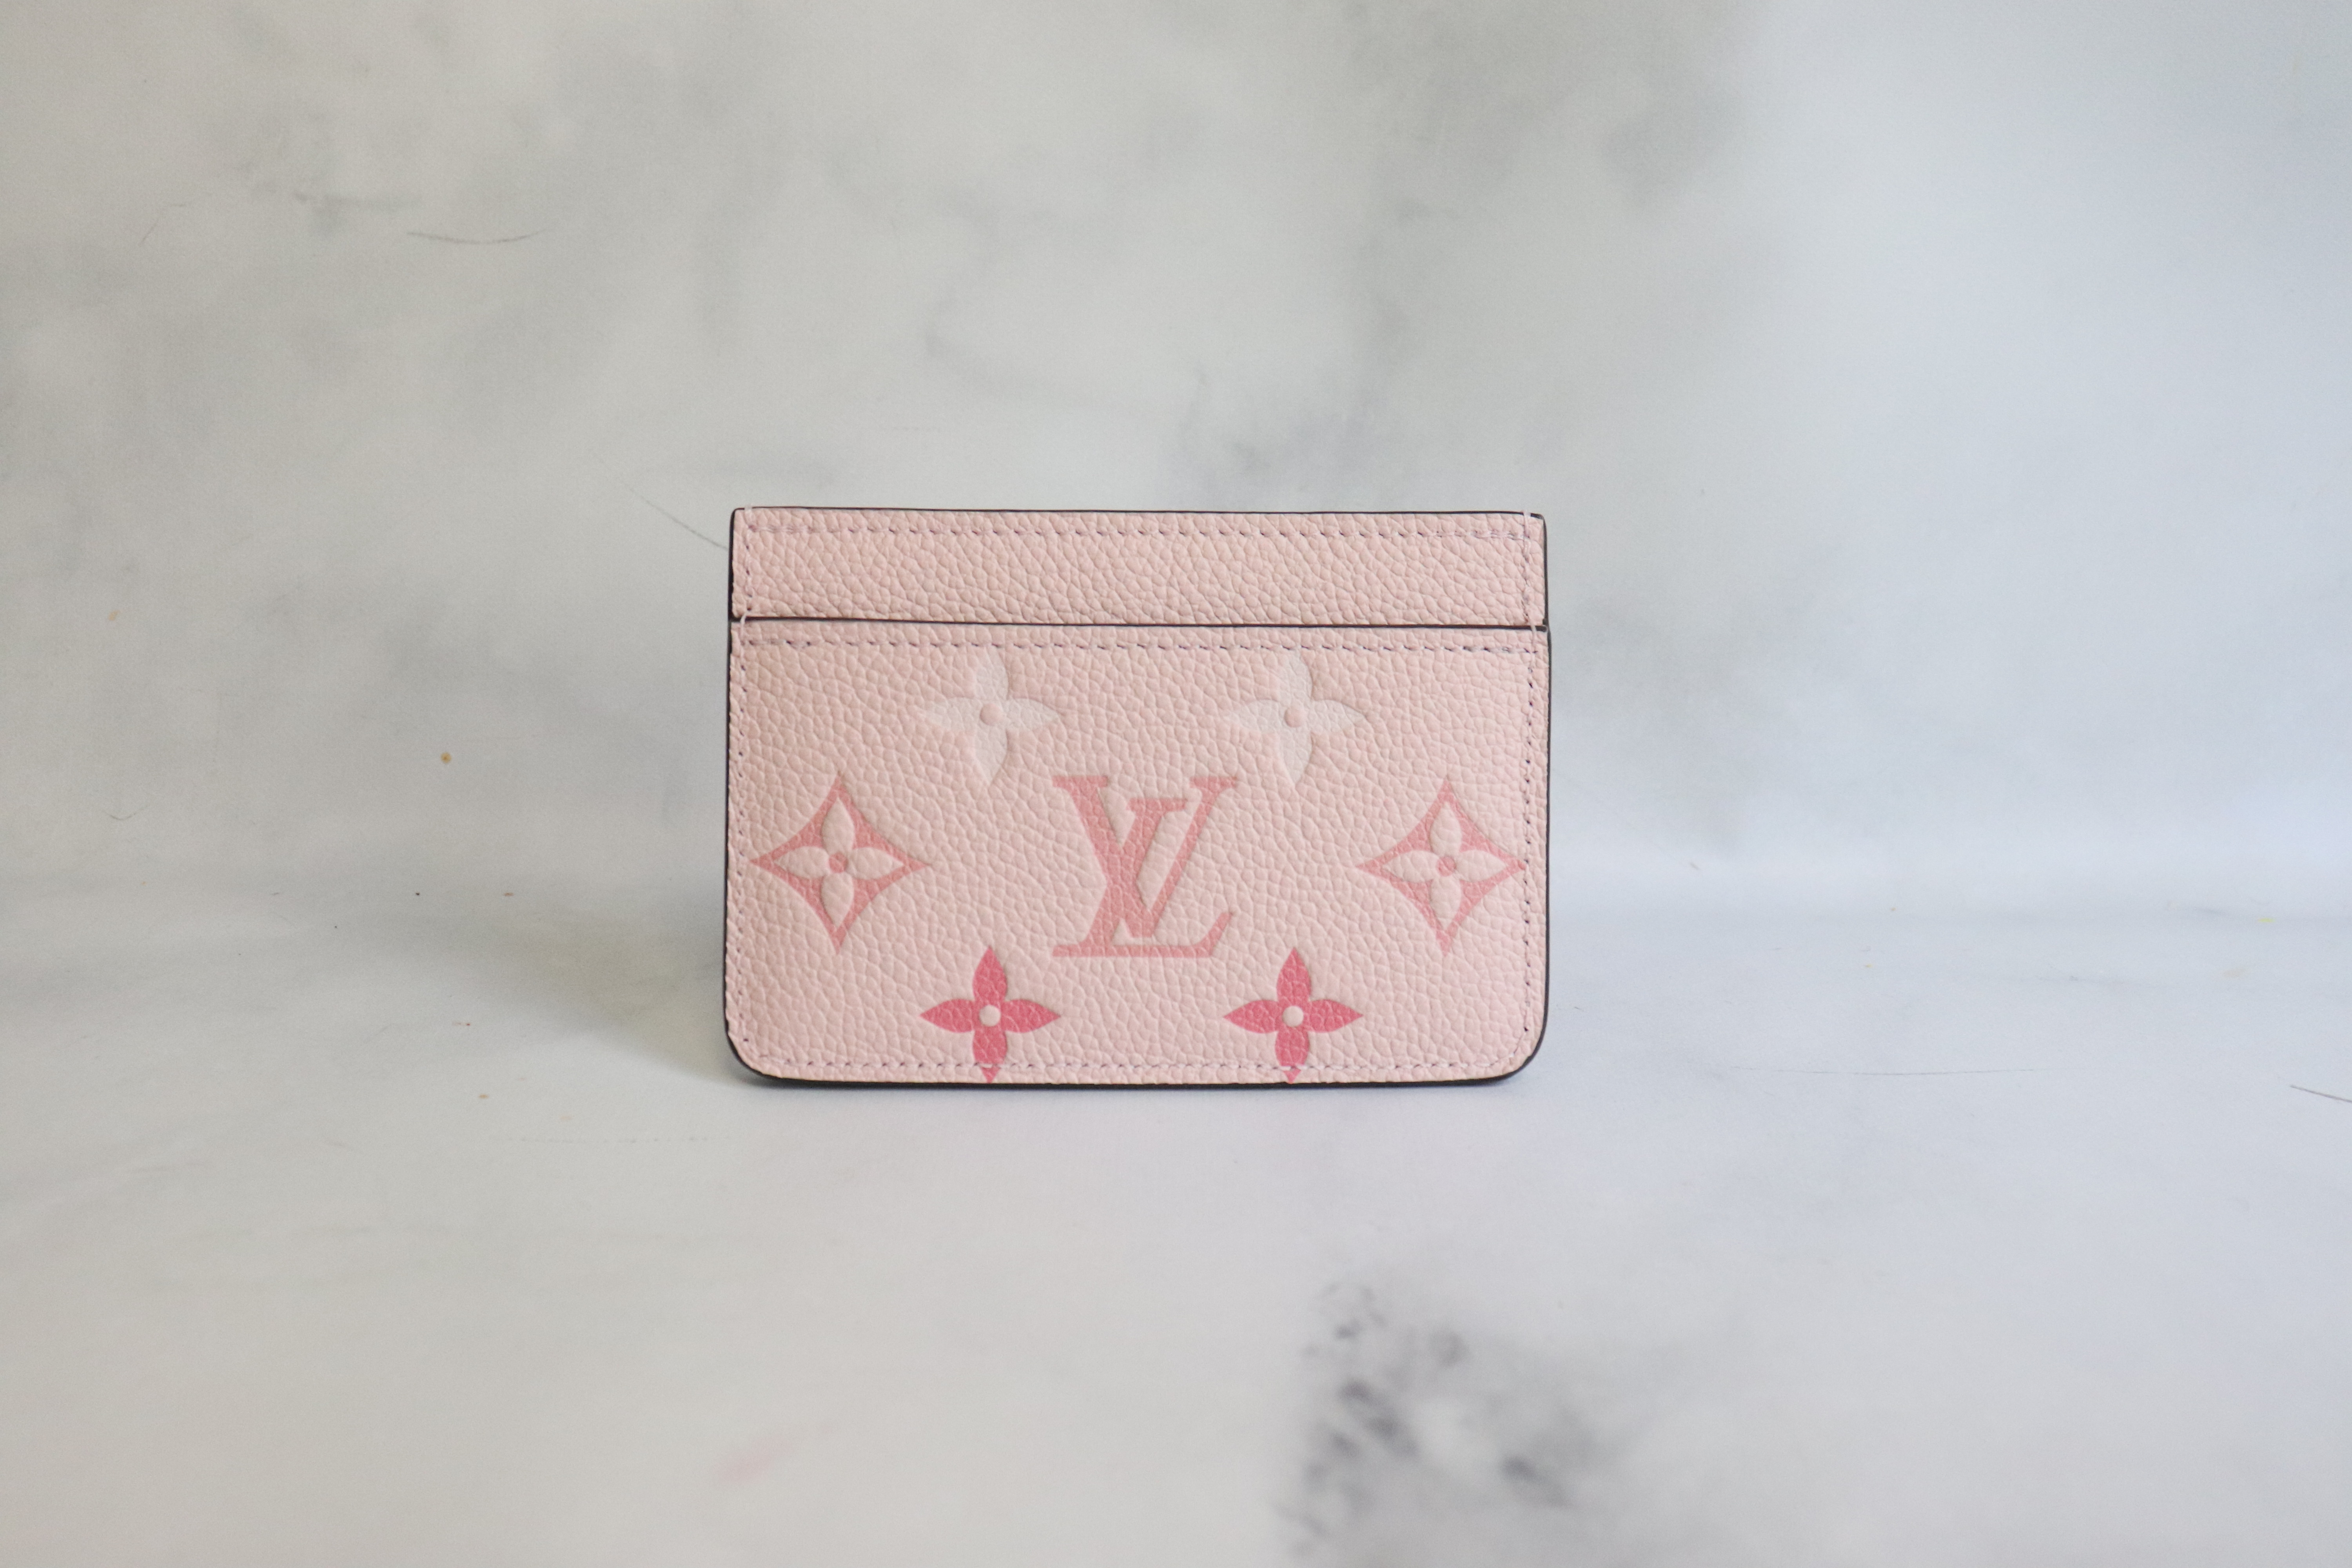 Louis Vuitton SLG Card Holder Pink Leather, New in Box - Julia